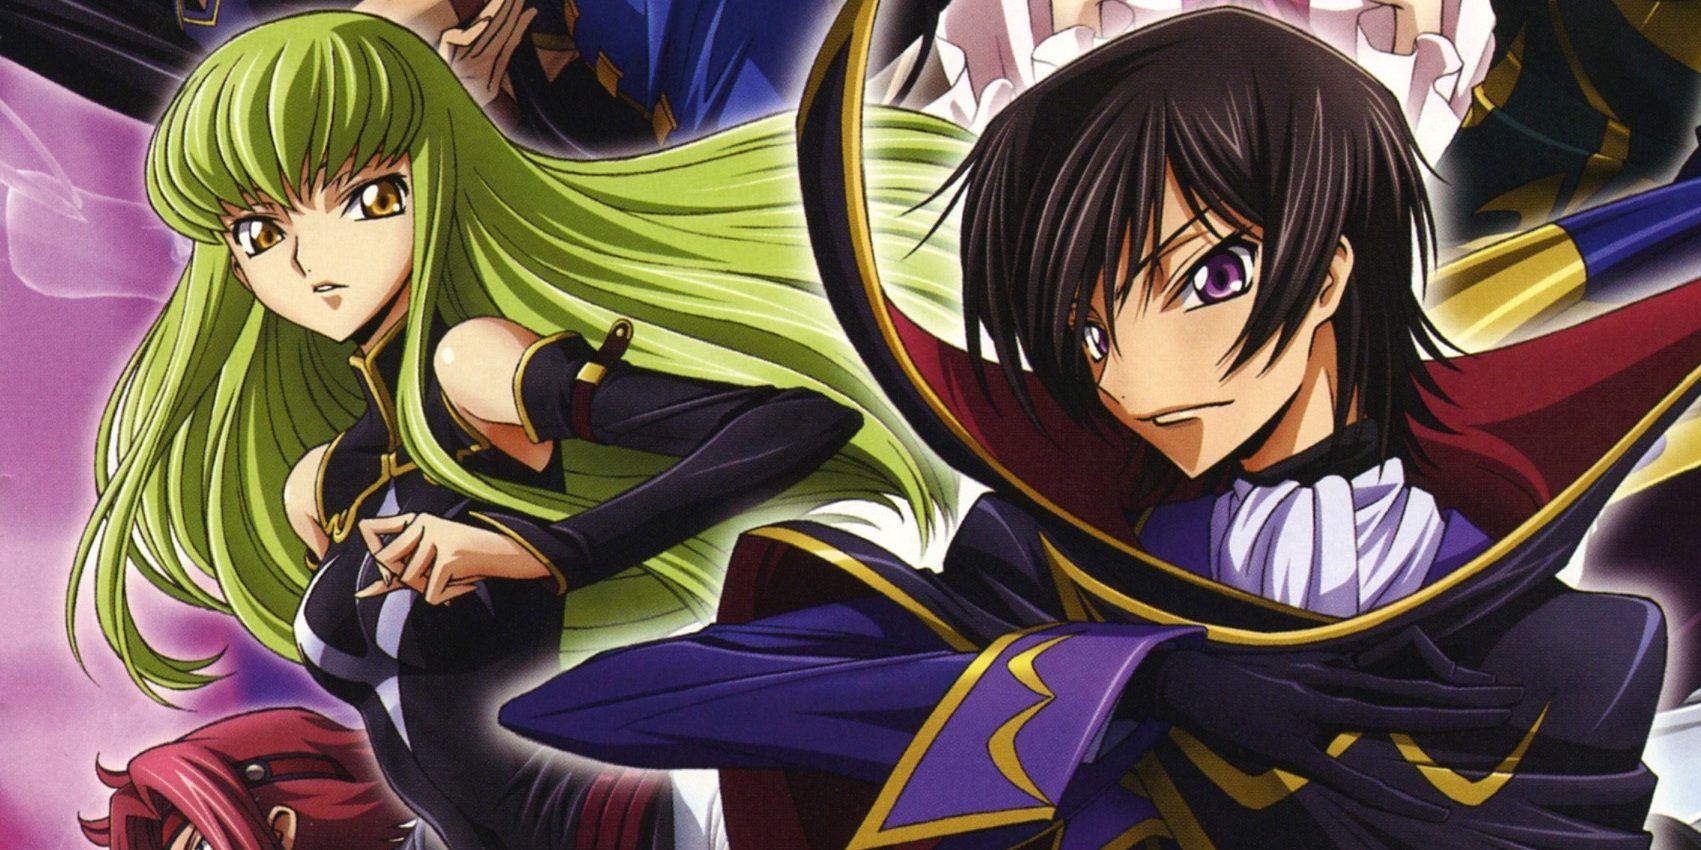 Code Geass Lelouch and C.C.